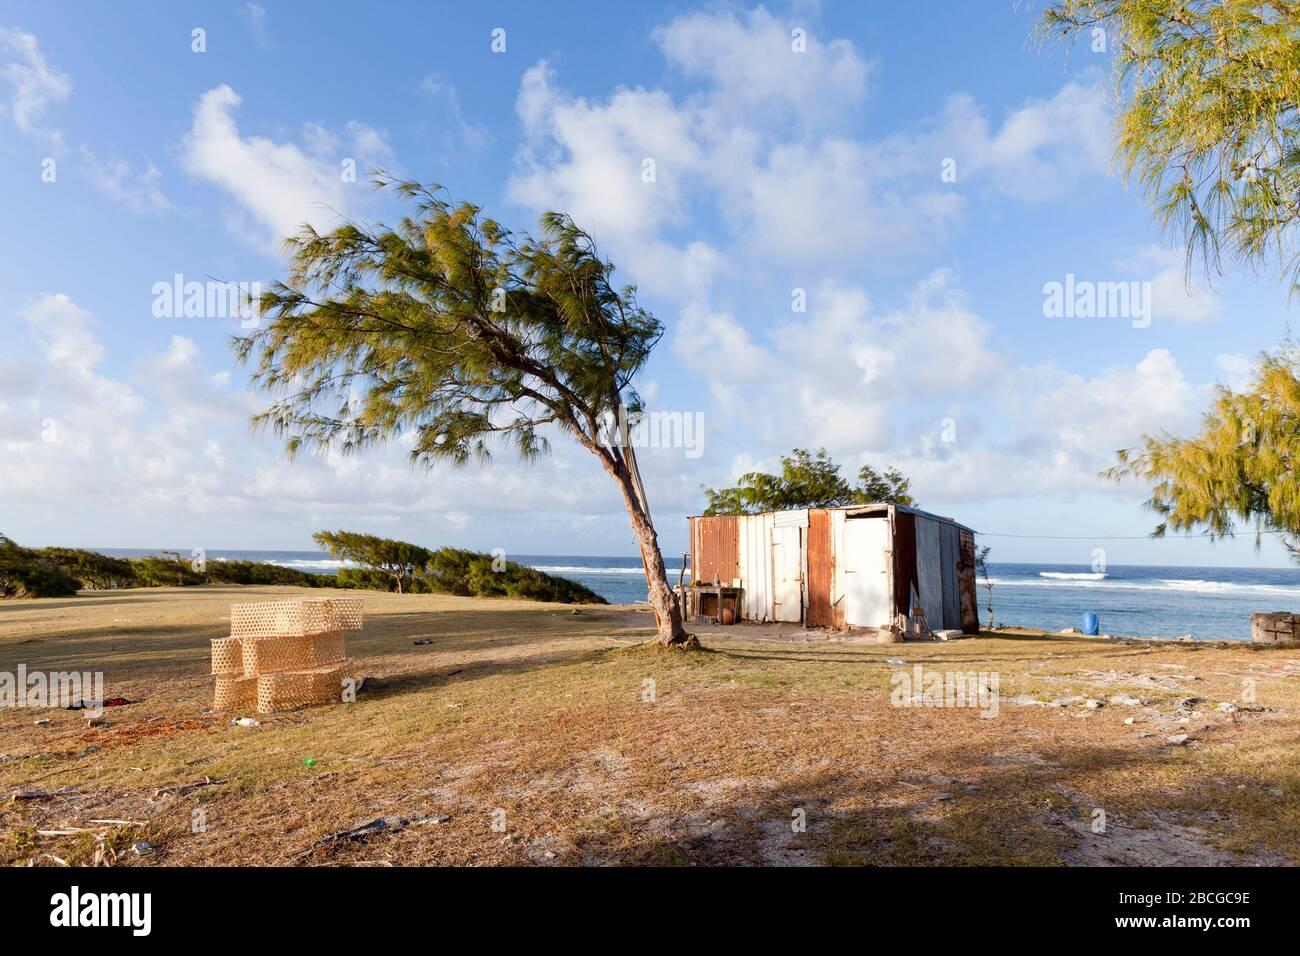 Tropical Landscape on the remote island of Rodrigue in the Indian Ocean, part of the Republik of Mauritius Stock Photo